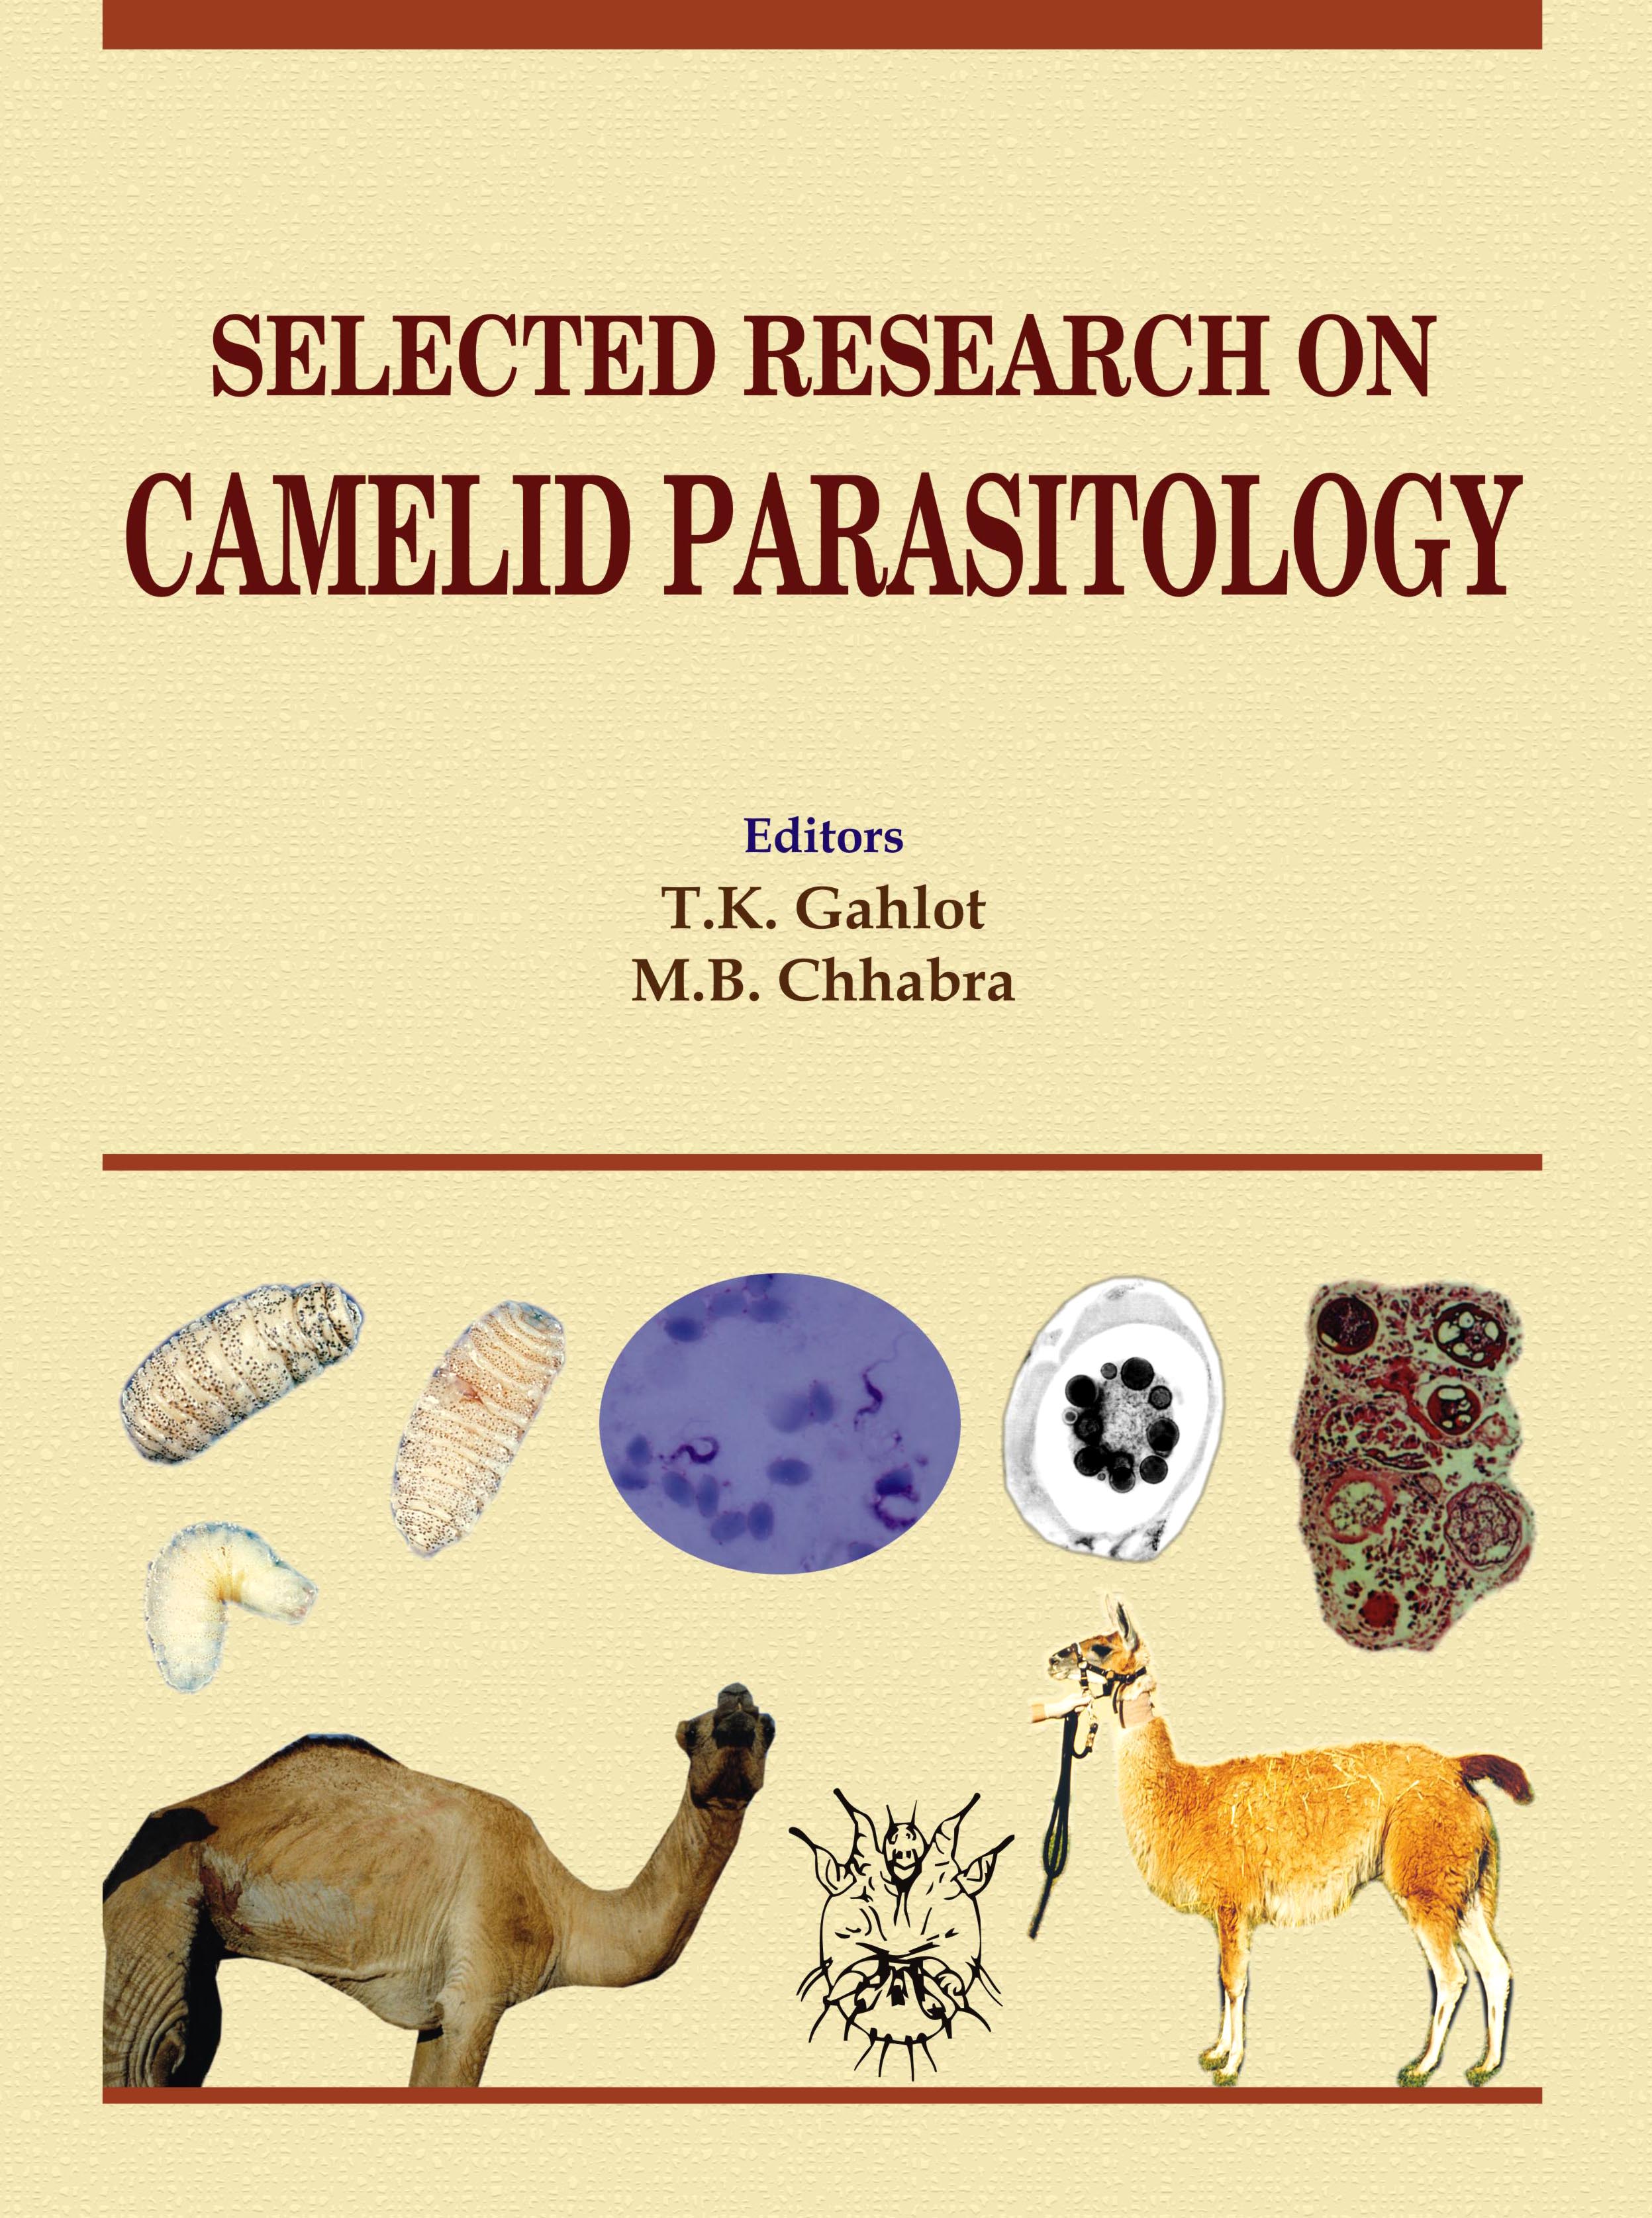 Selected Research On Camelid Parasitology